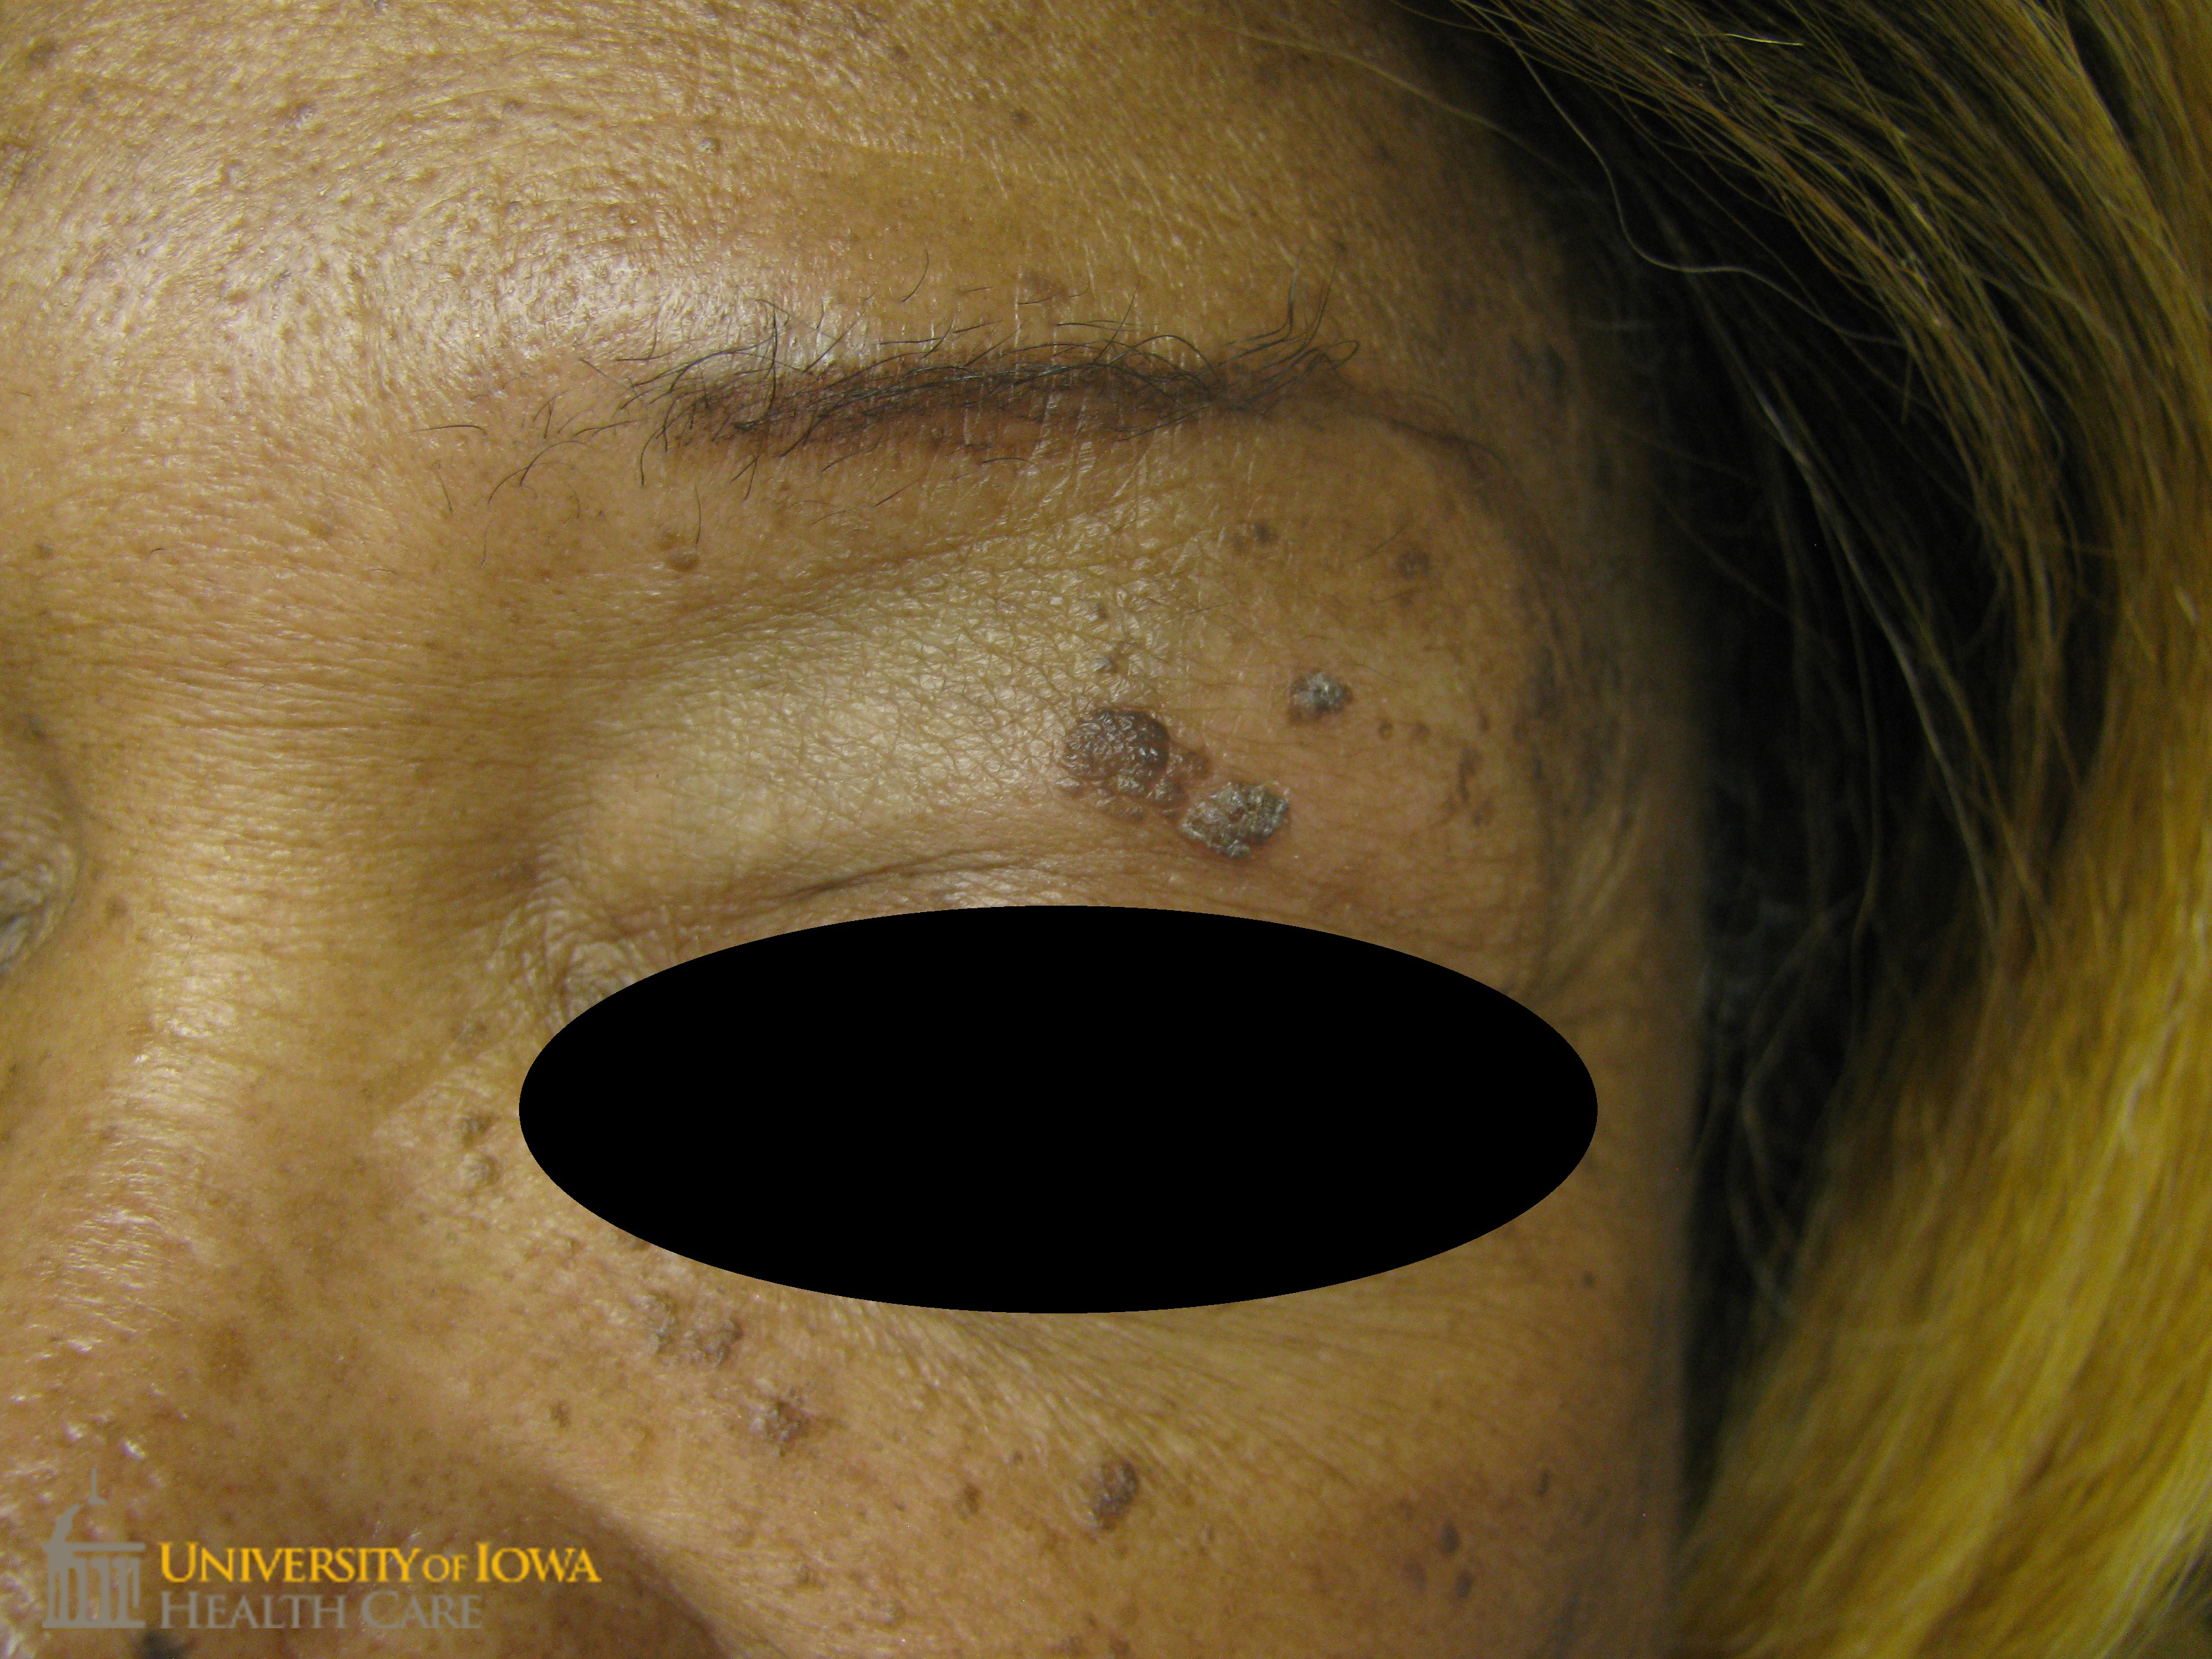 Verrucous brown stuck-on papules on the upper eyelid and cheeks. (click images for higher resolution).